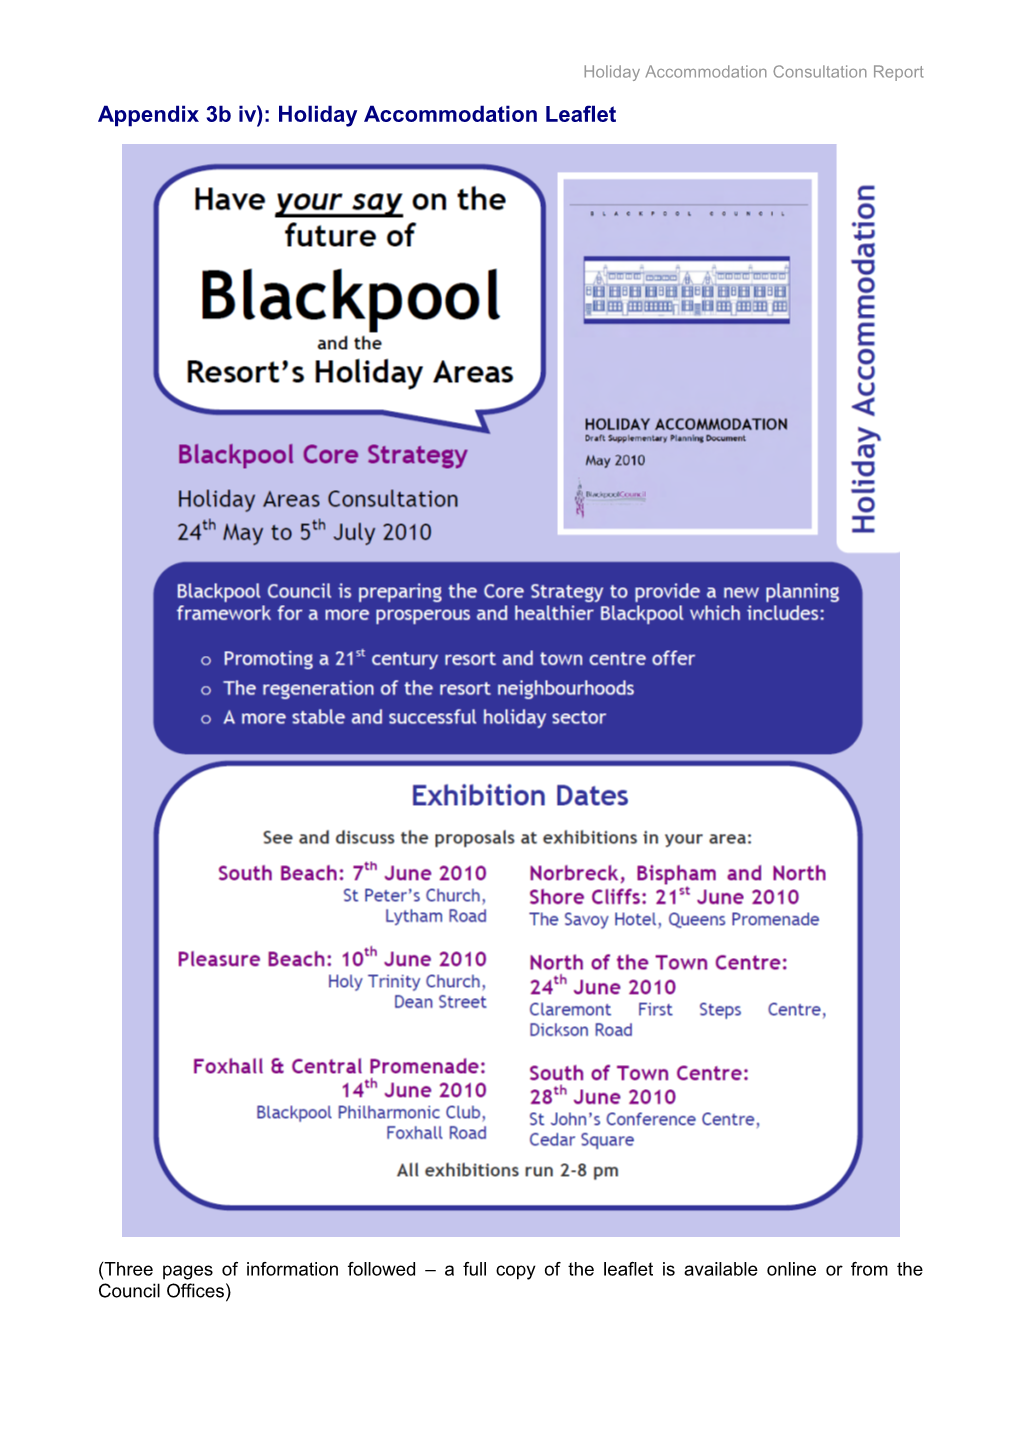 Blackpool Core Strategy/Holiday Accommodation Draft Supplementary Planning Document Consultation